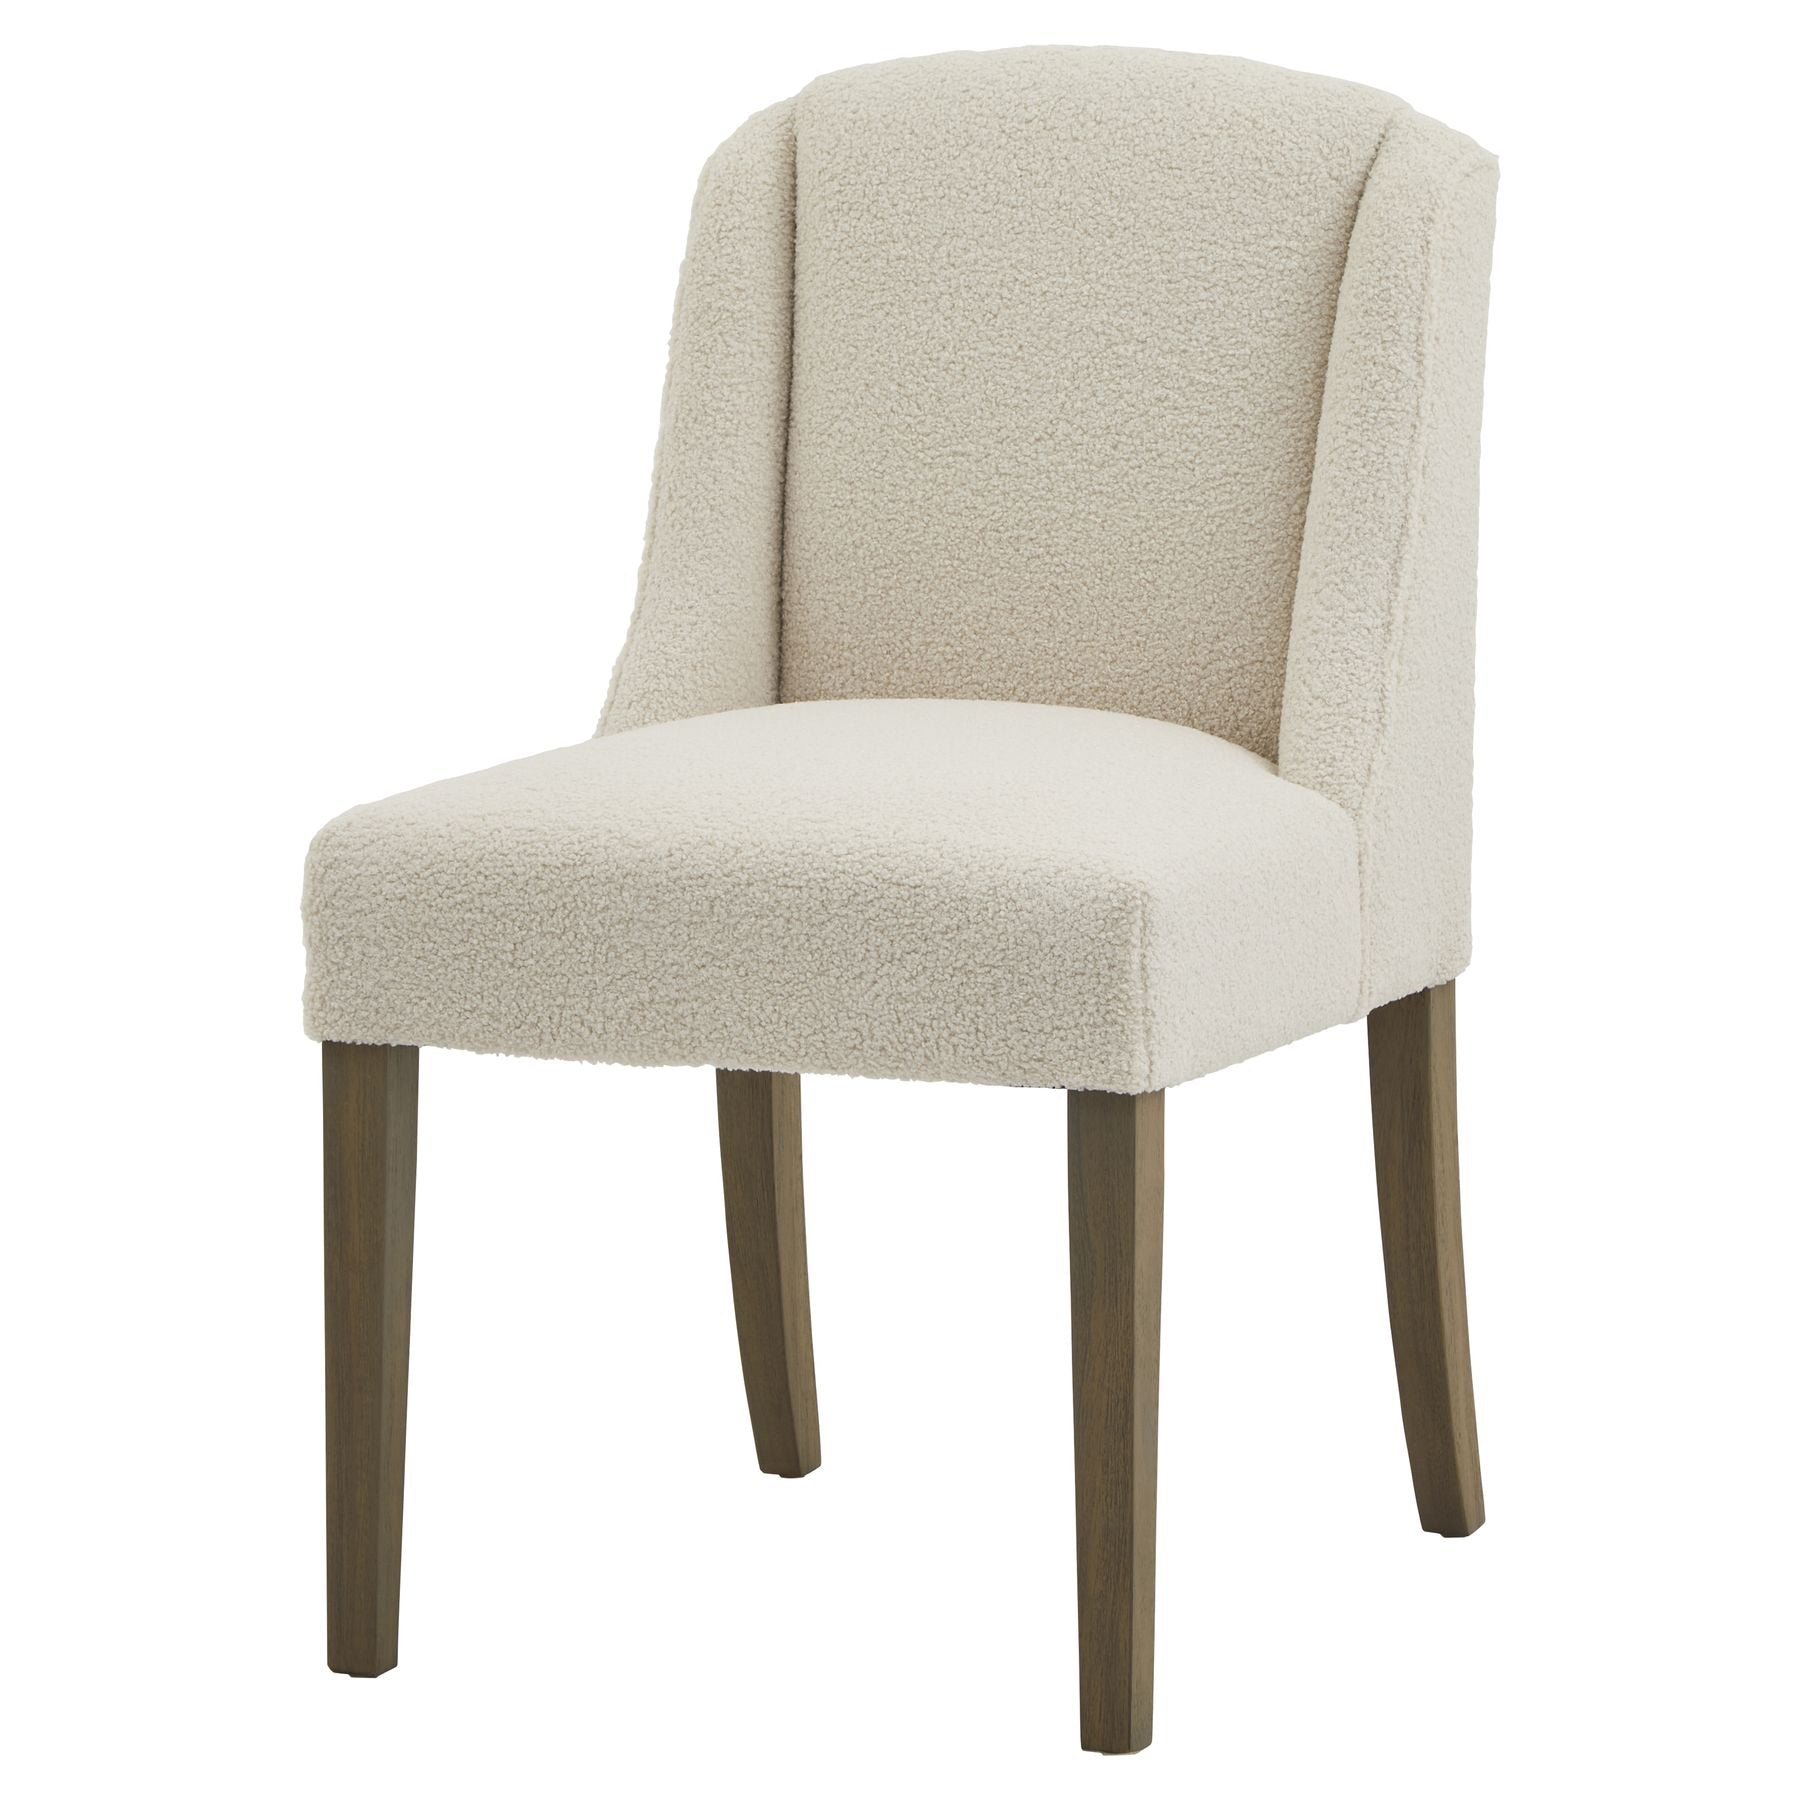 View Compton Bouclé Dining Chair information